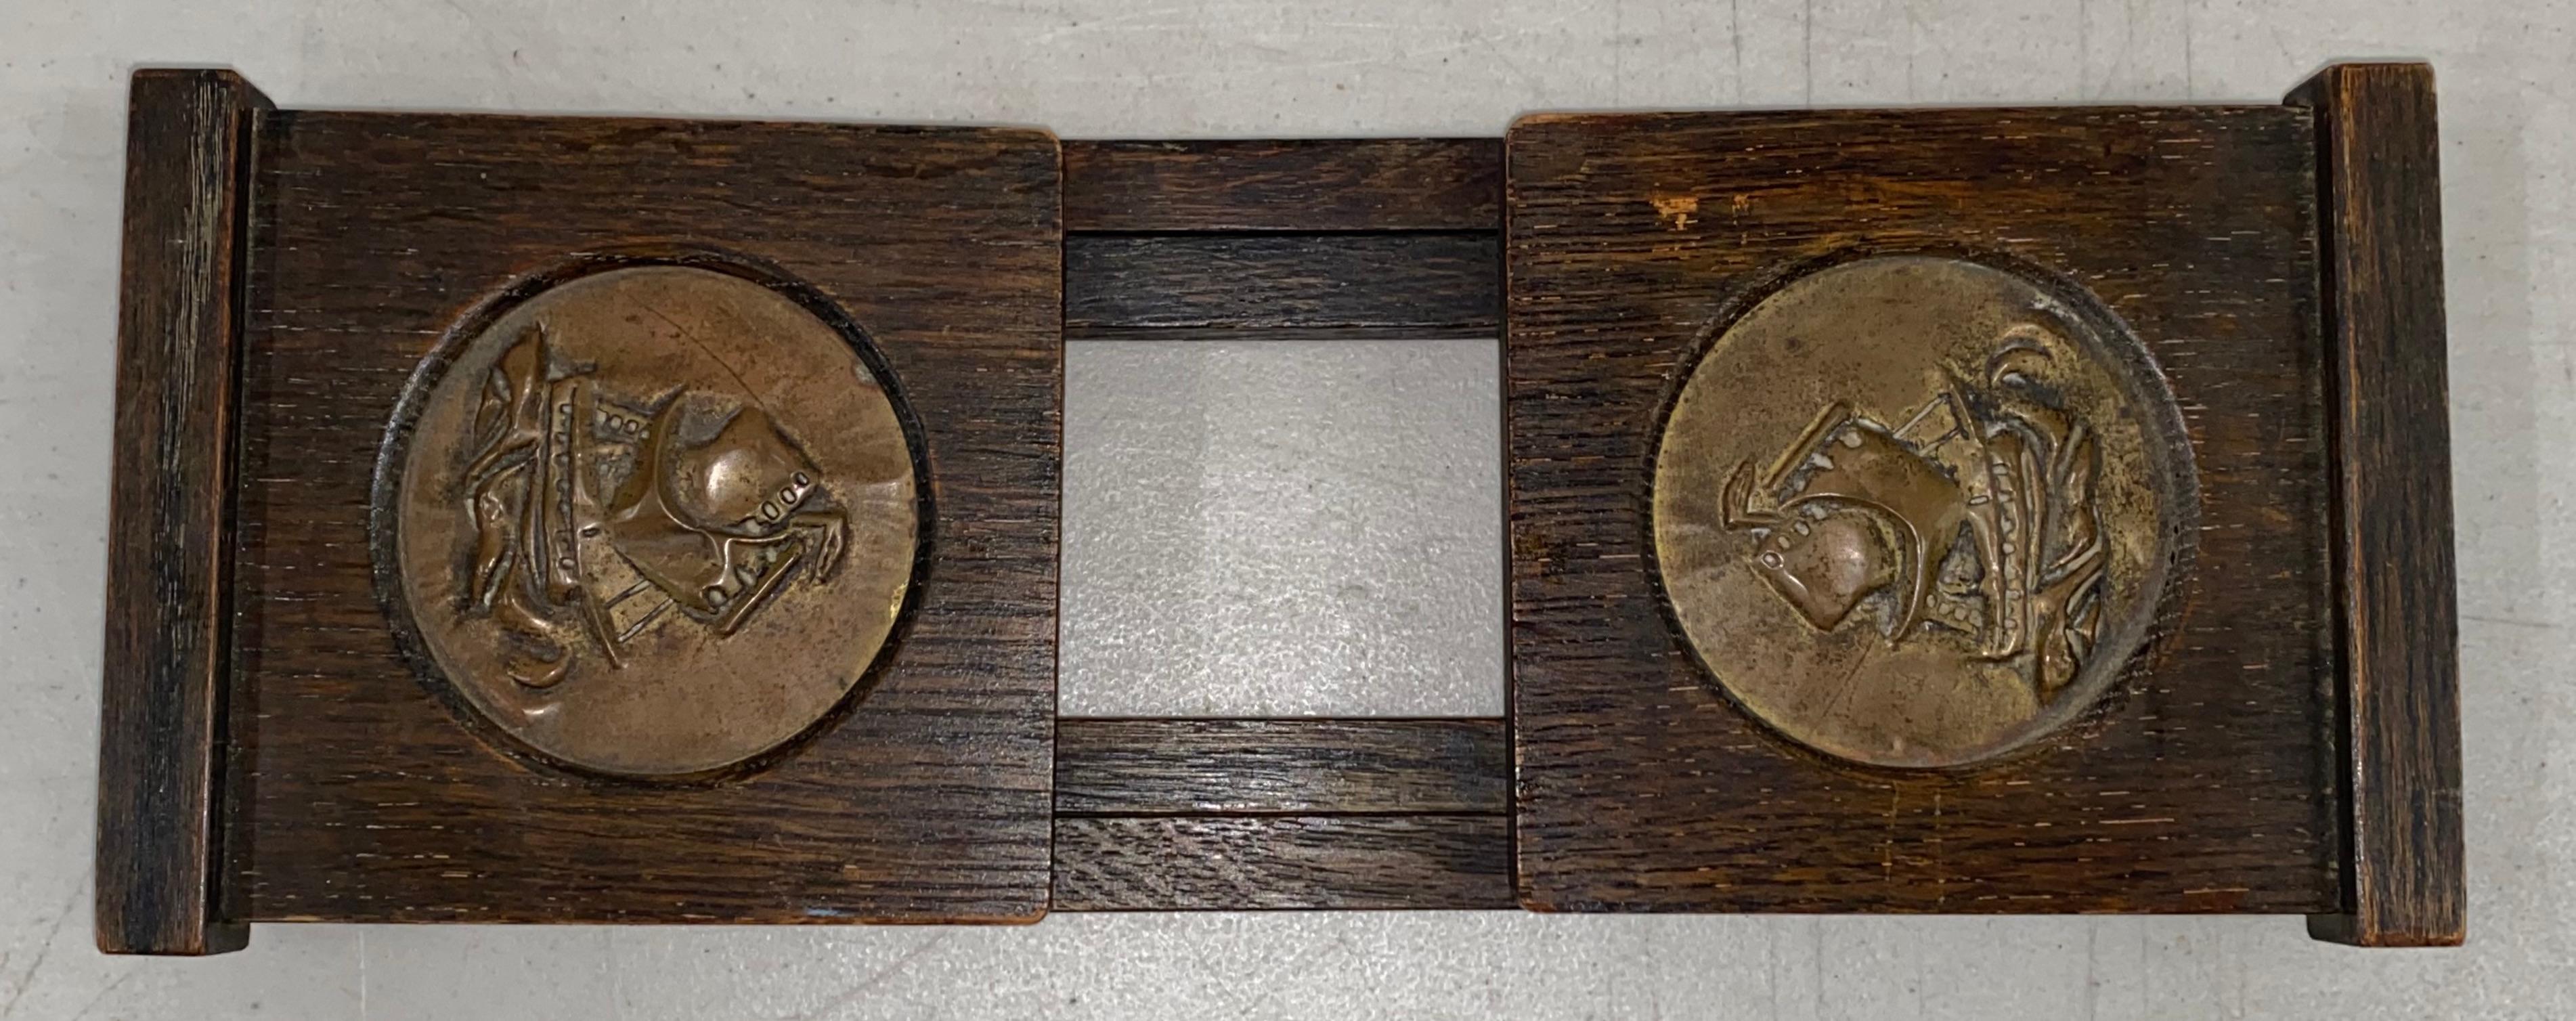 Arts & Crafts oak & brass folding / expanding book holder, C.1920s.

Hand crafted book holder with brass nautical tall ship medallions at each end

The book holder is foldable and it expands as your collection grows

Measures: 17.5